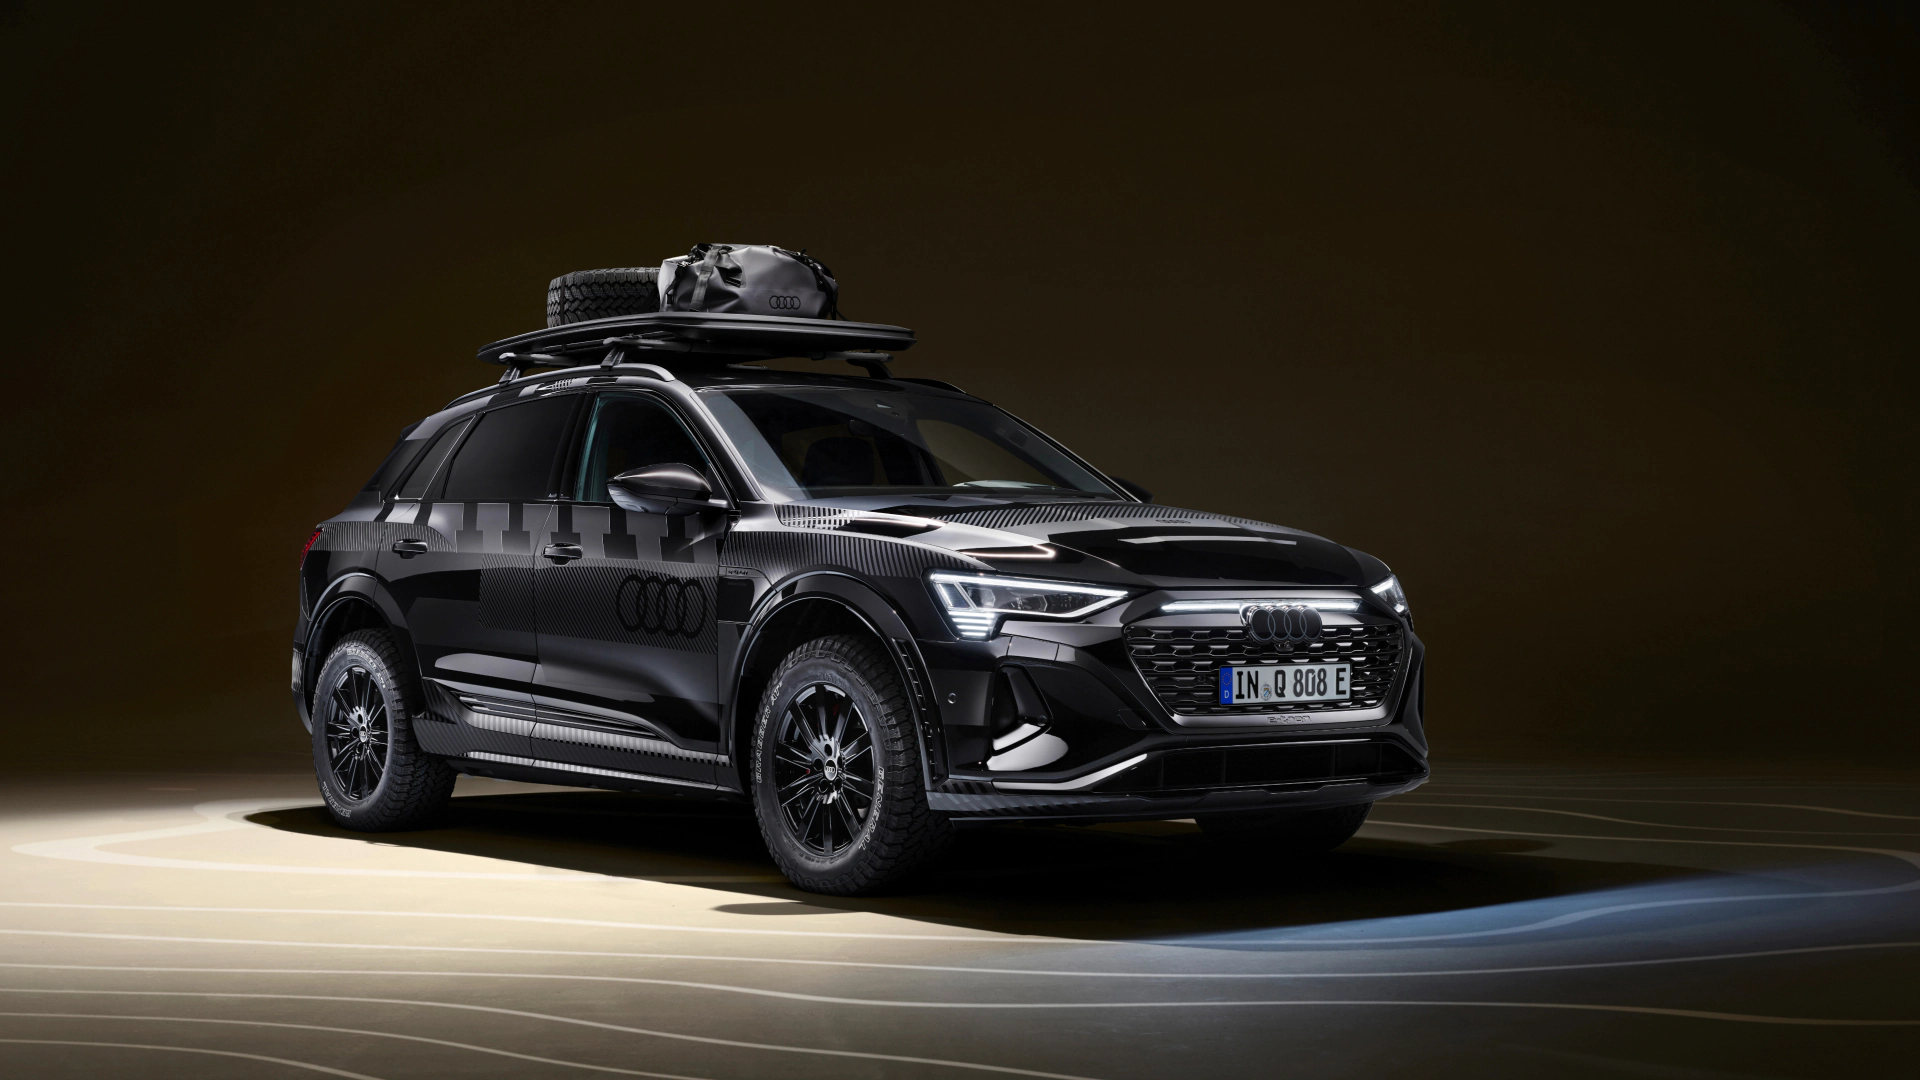 Lateral front view of the Audi Q8 e-tron edition Dakar.